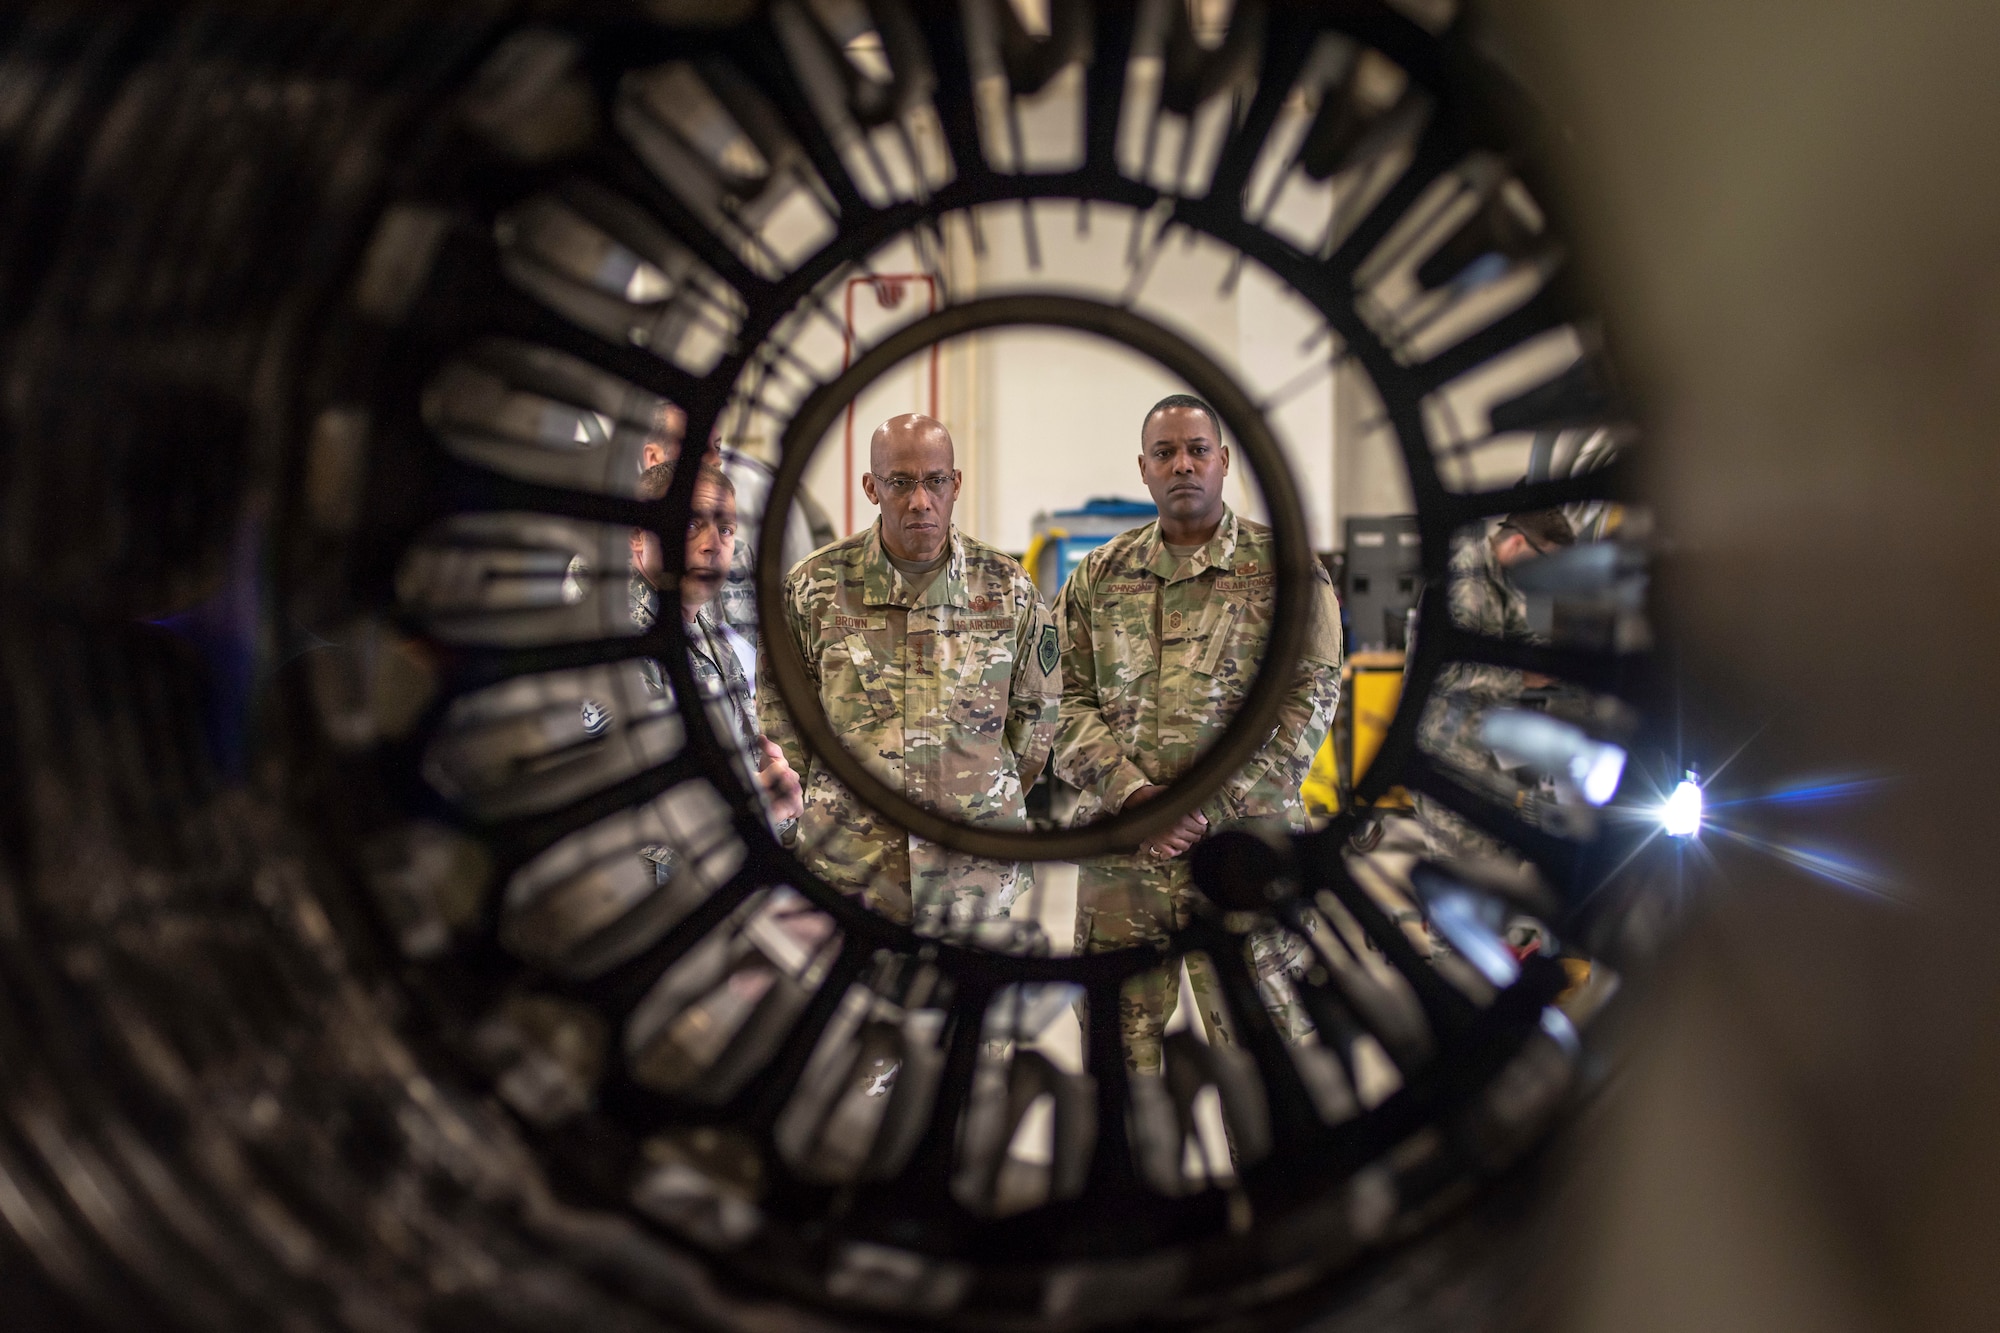 Gen. CQ Brown, Jr., Pacific Air Forces commander, and Chief Master Sgt. Anthony Johnson, PACAF command chief, listen as the 35th Maintenance Squadron jet engine intermediate maintenance section chief explains the important role the centralized engine repair facility plays in the 35th Maintenance Group’s mission during their tour of the installation at Misawa Air Base, Japan, Oct. 25, 2018. Brown visited with Airmen across the installation in his first visit to Misawa since taking command this past summer. He encouraged Airmen to step up and share their innovative ideas as the command works together to be ready, resilient and postured for the future. (U.S. Air Force photo by Tech. Sgt. Benjamin W. Stratton)